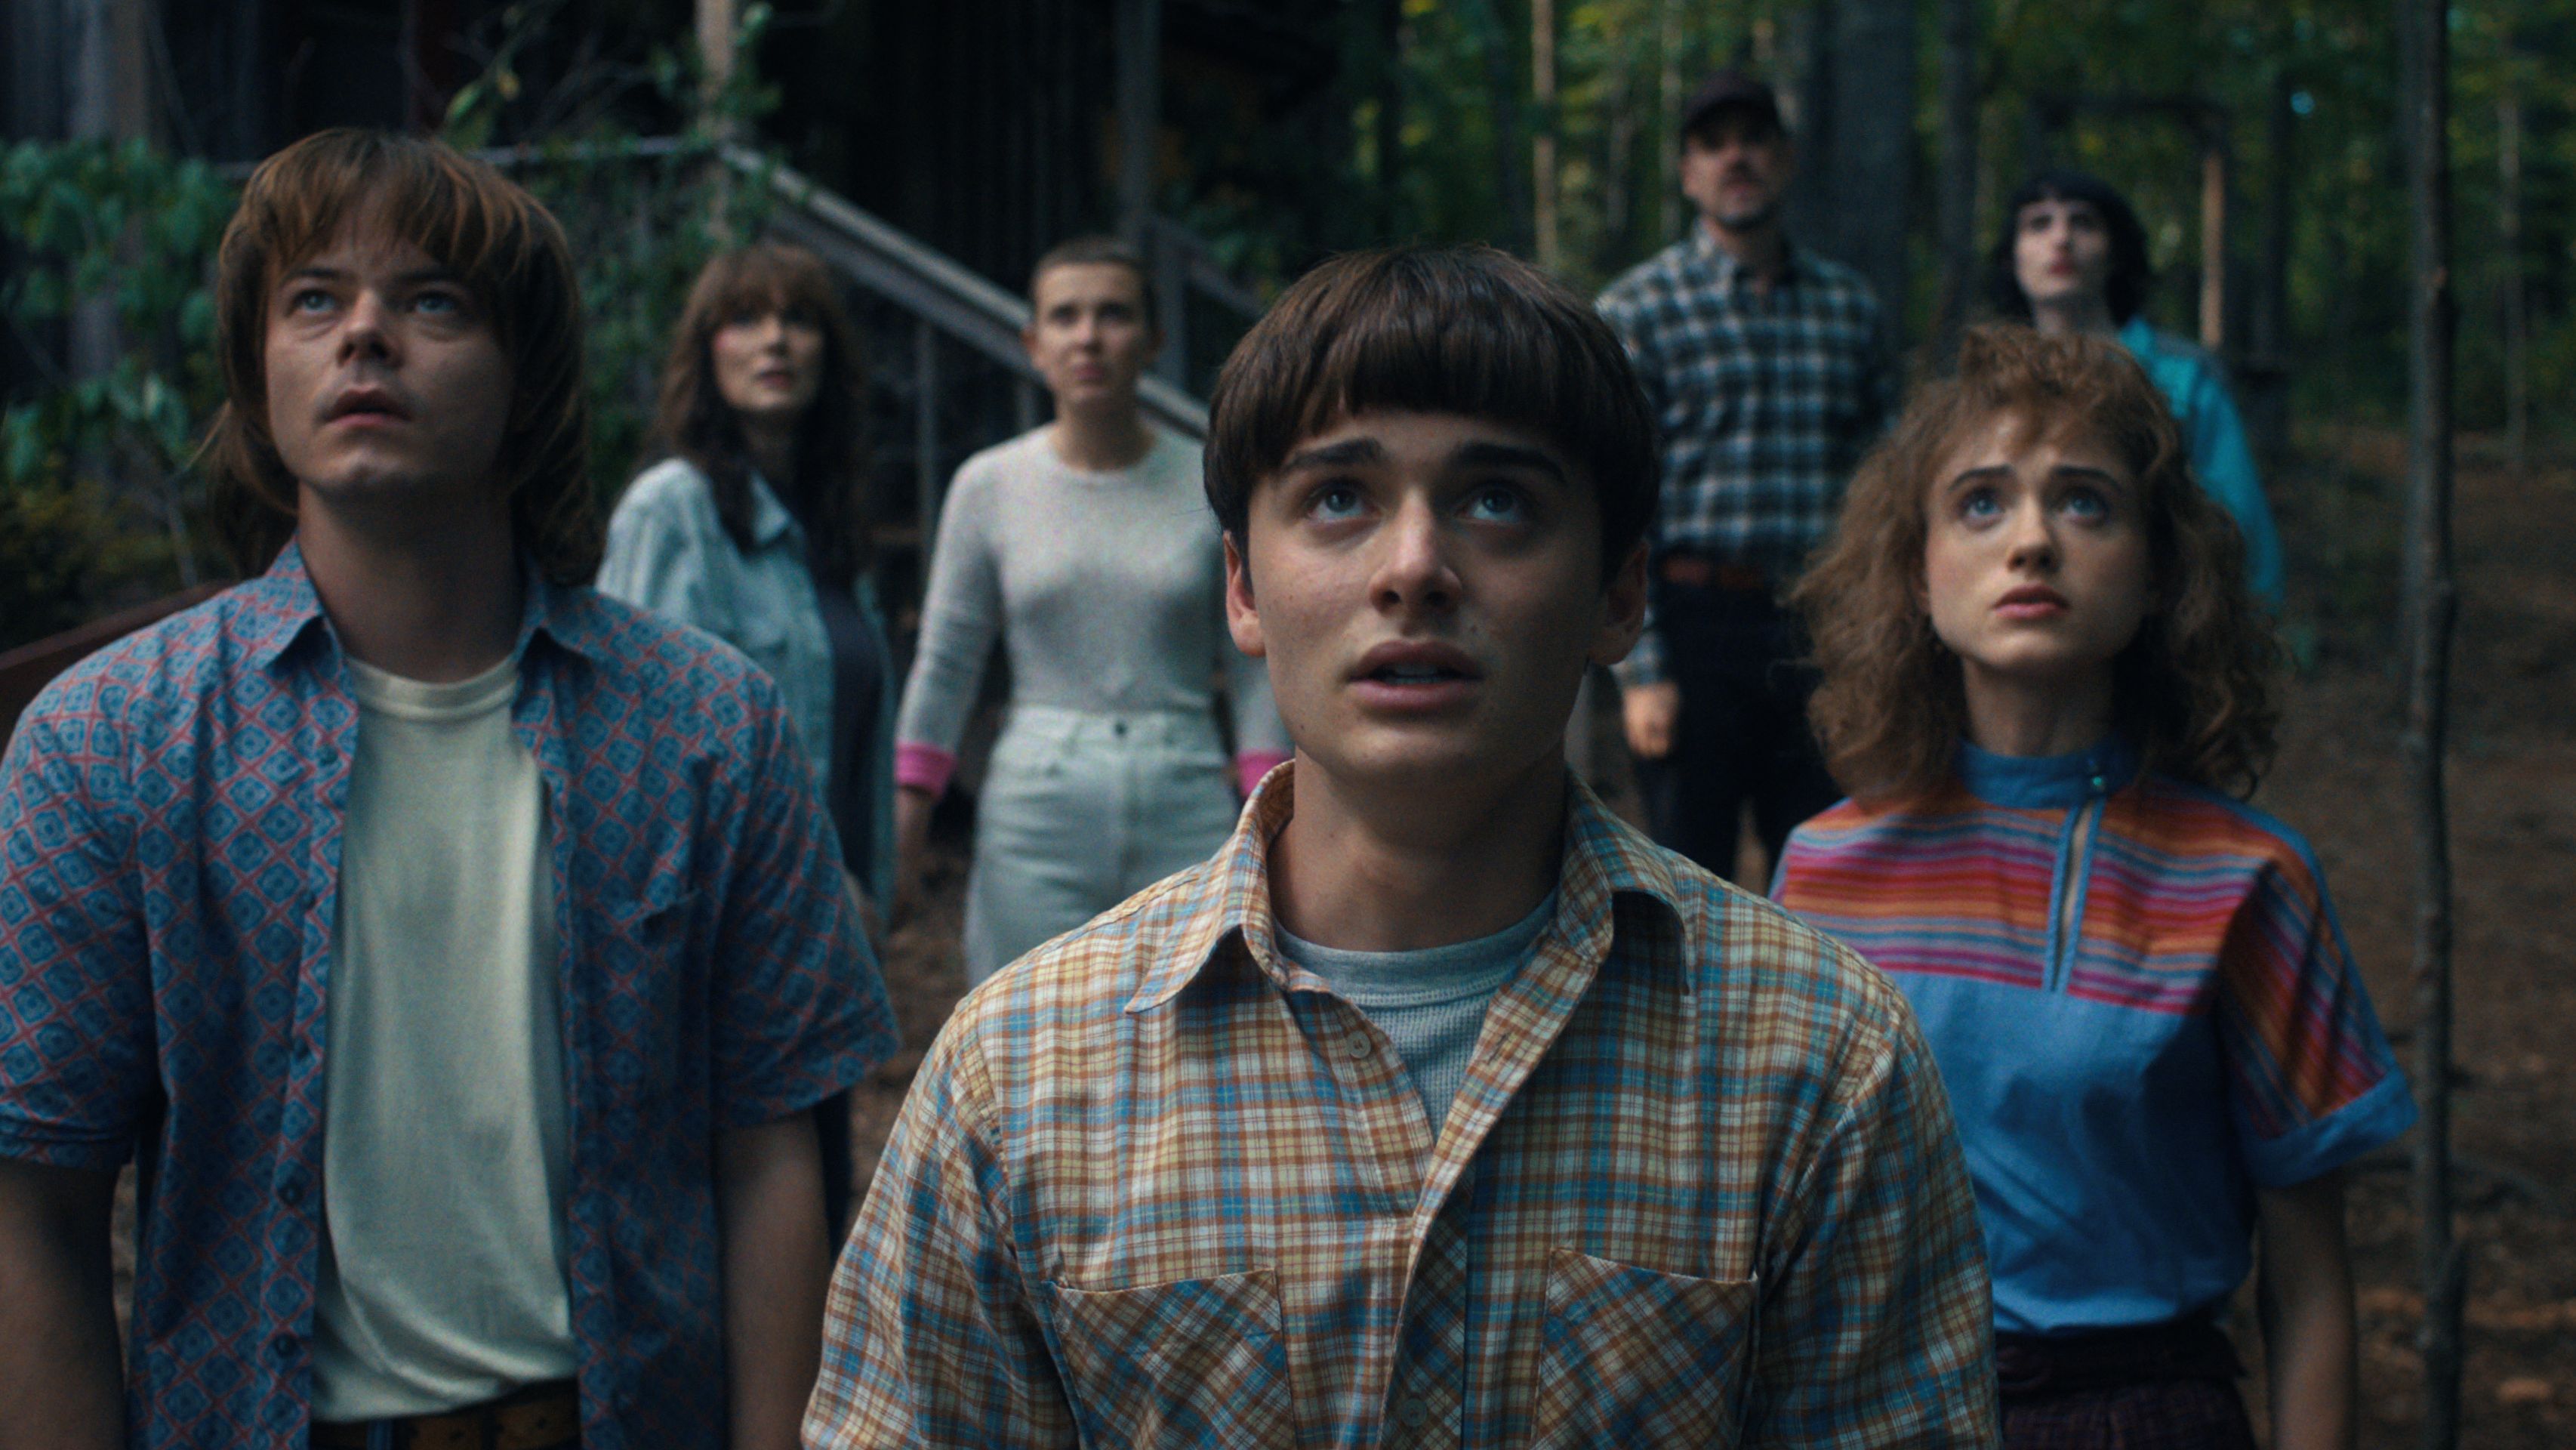 Stranger Things' to End With Season 5, Release Dates for Two-Part Season 4  Revealed